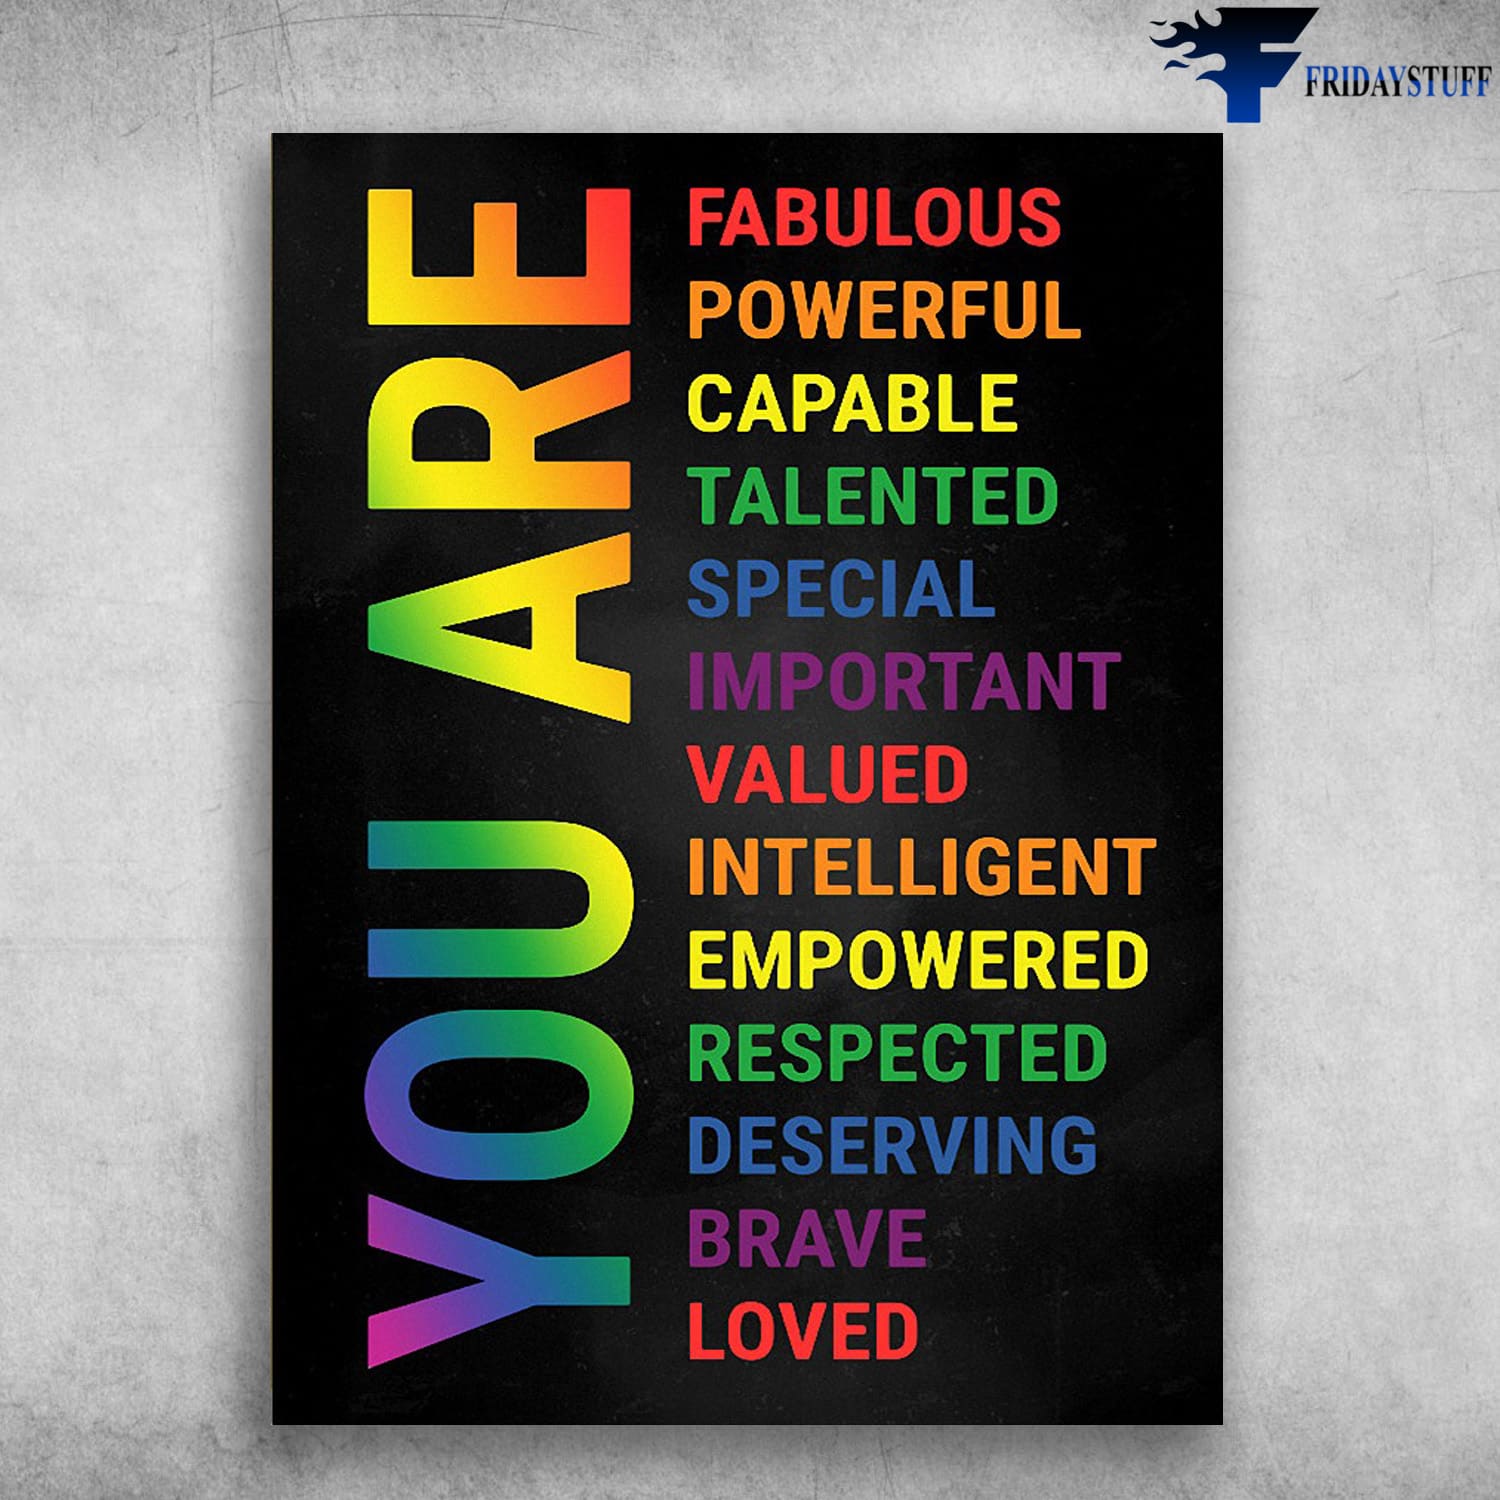 You Are Fabulous, Powerful, Capable, Talented, Special, Important , Valued, Intelligent